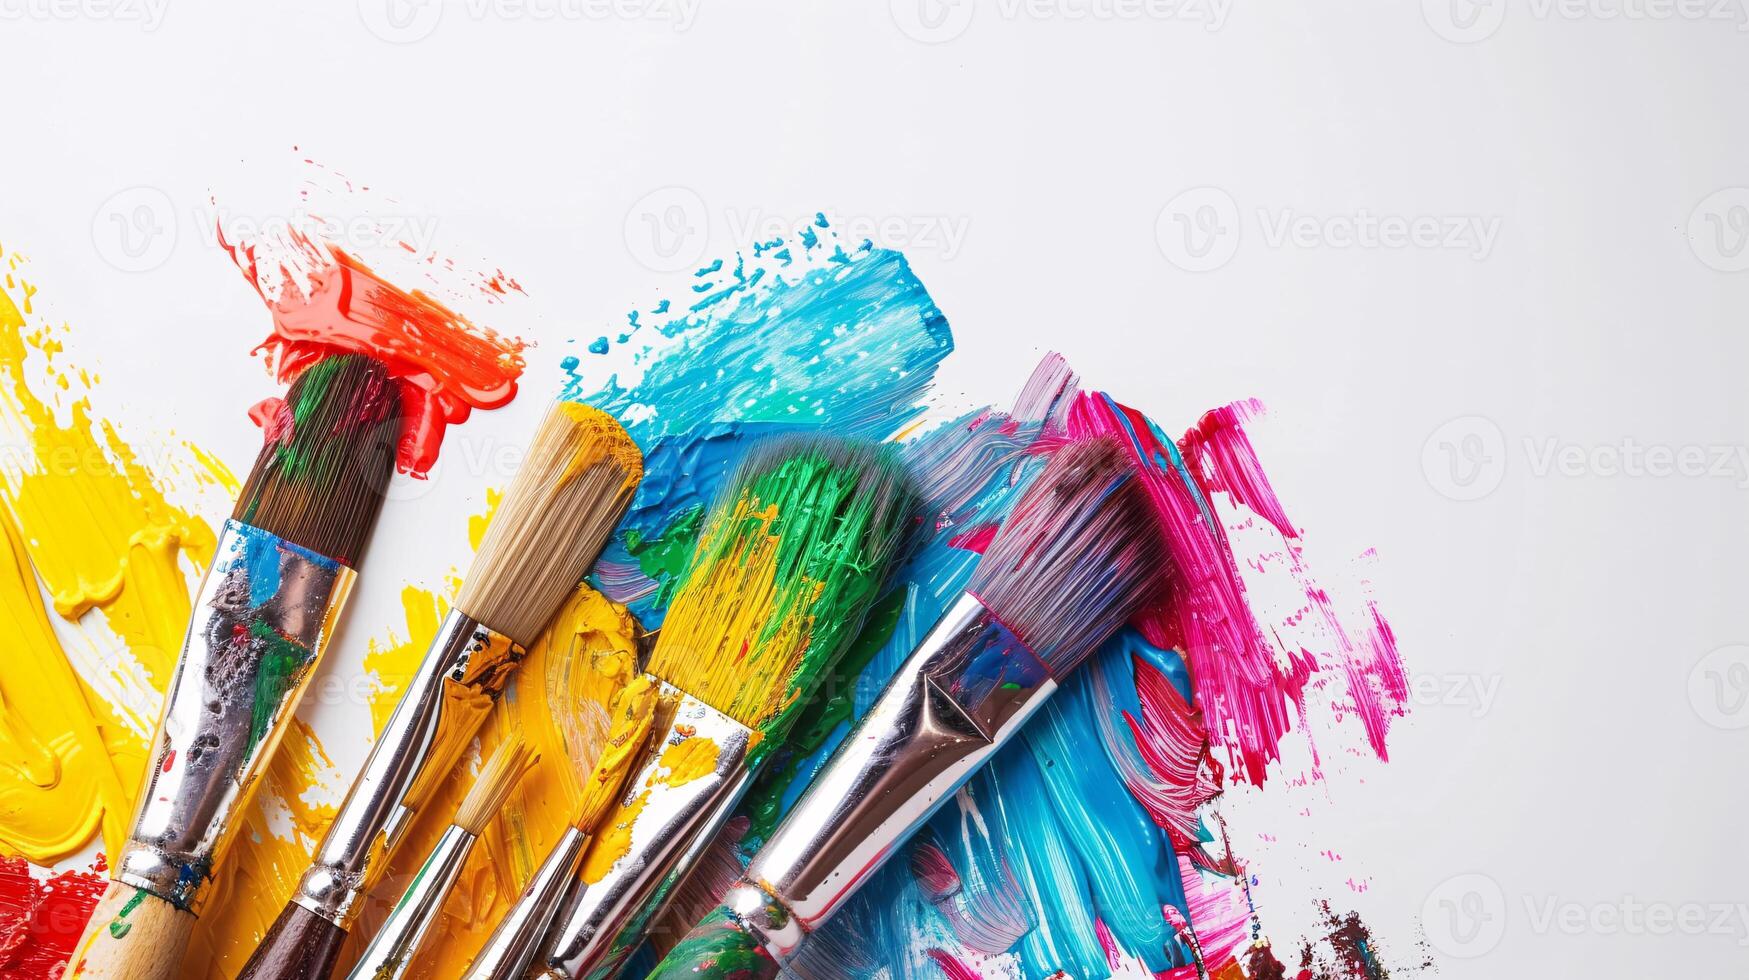 An arrangement of colorful paintbrushes dipped in various hues of paint on a pristine white surface photo